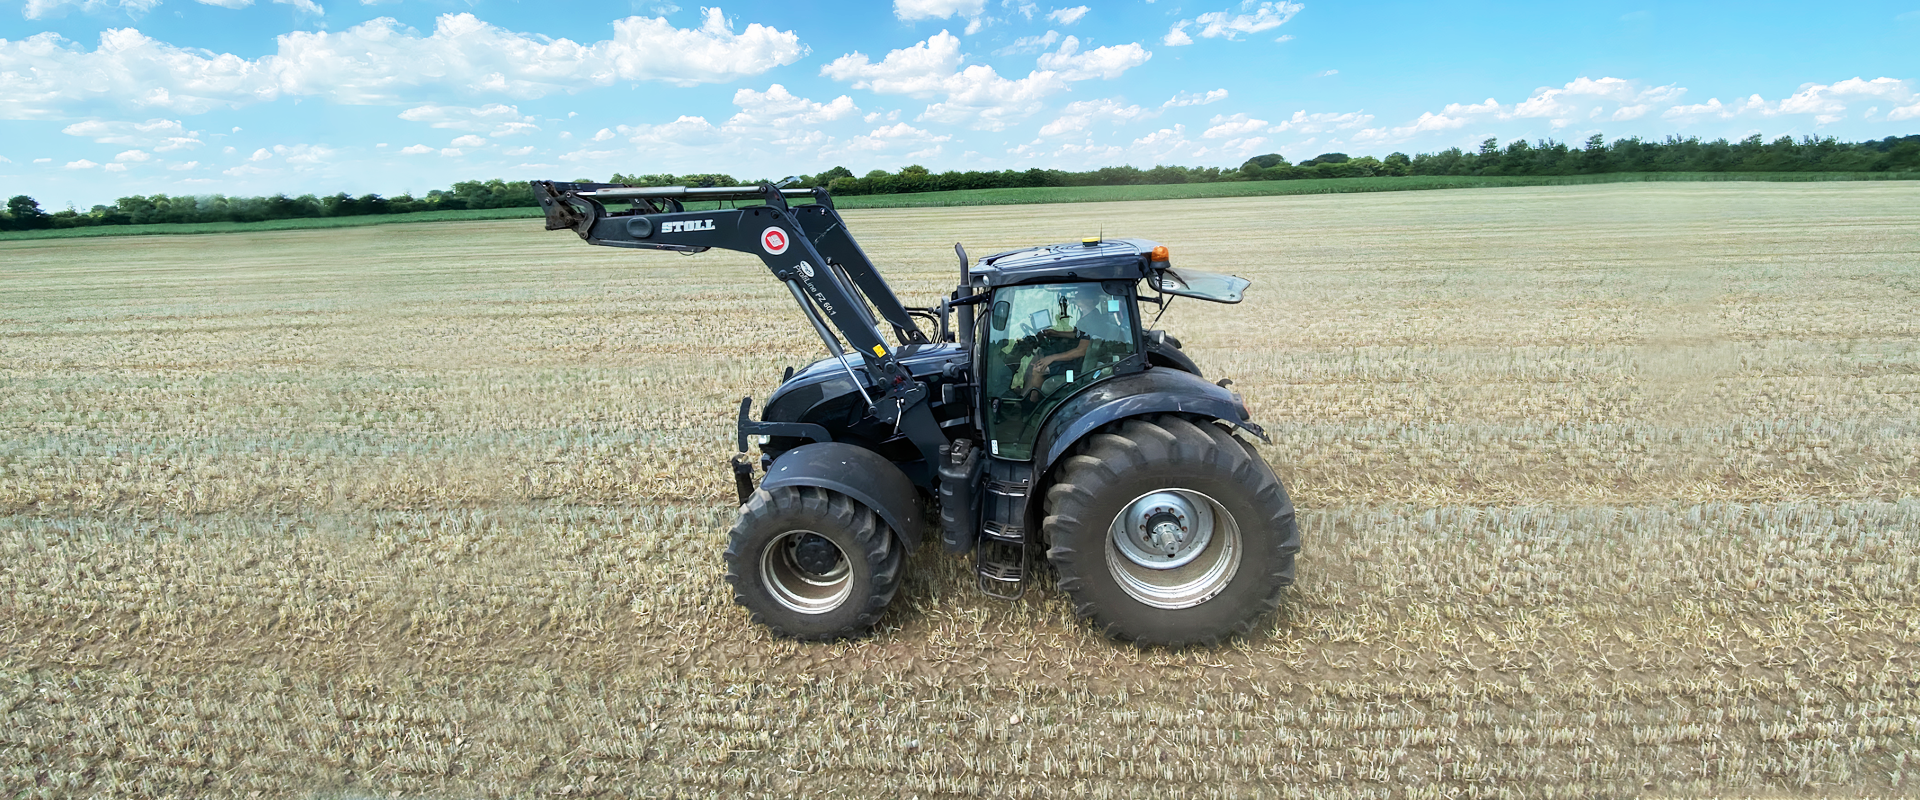 Tractor autosteer – the single best device to help increase agriculture precision on your farm